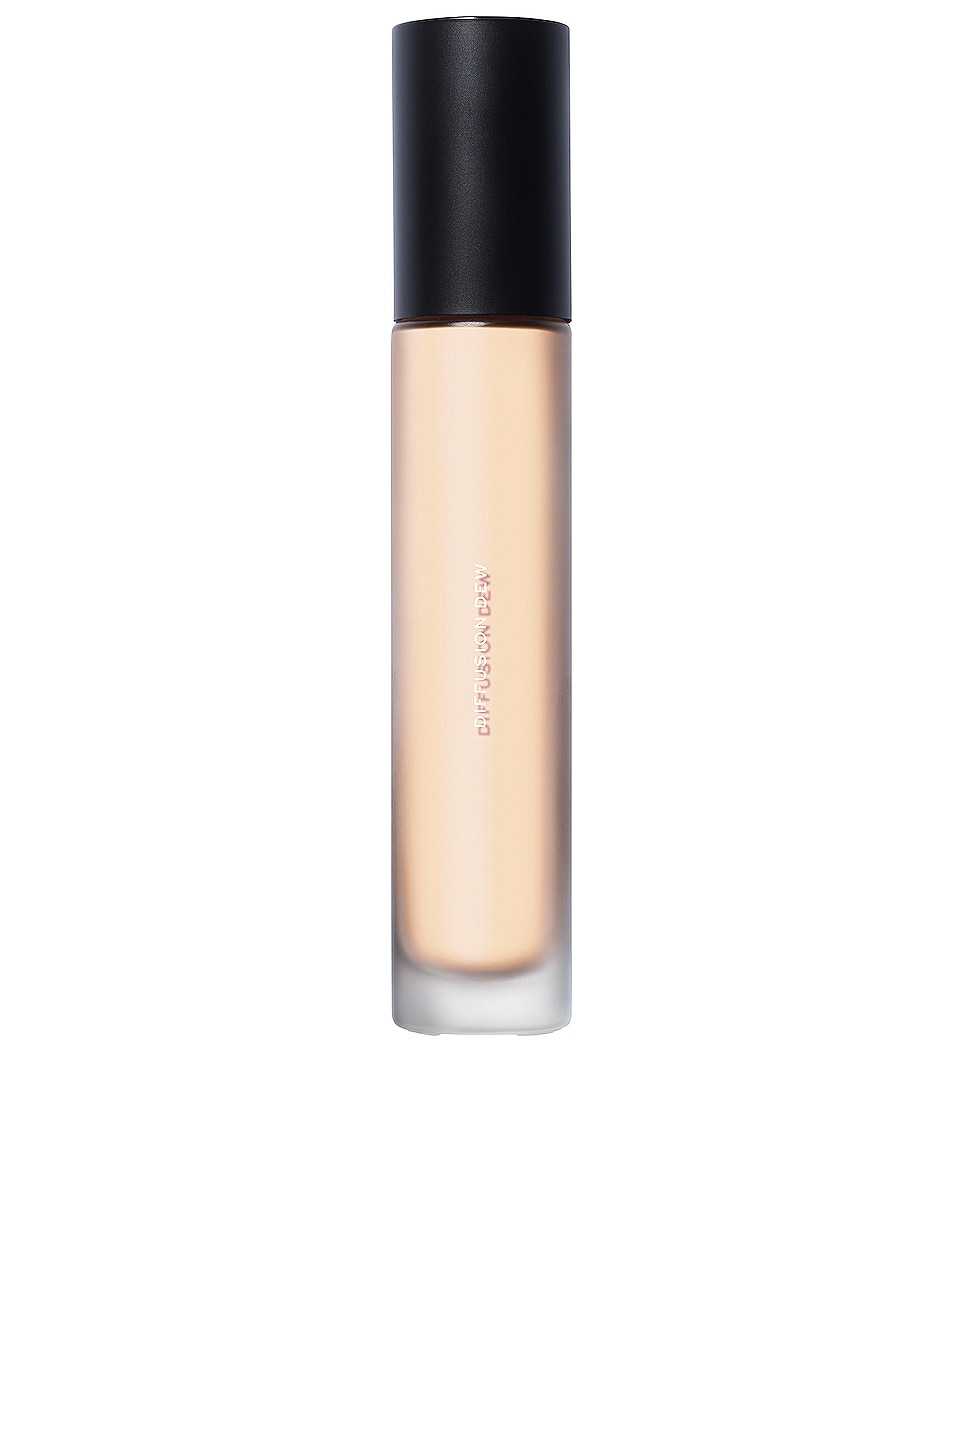 MAKE Beauty Diffusion Dew Radiant Skin Tint in Fair 01